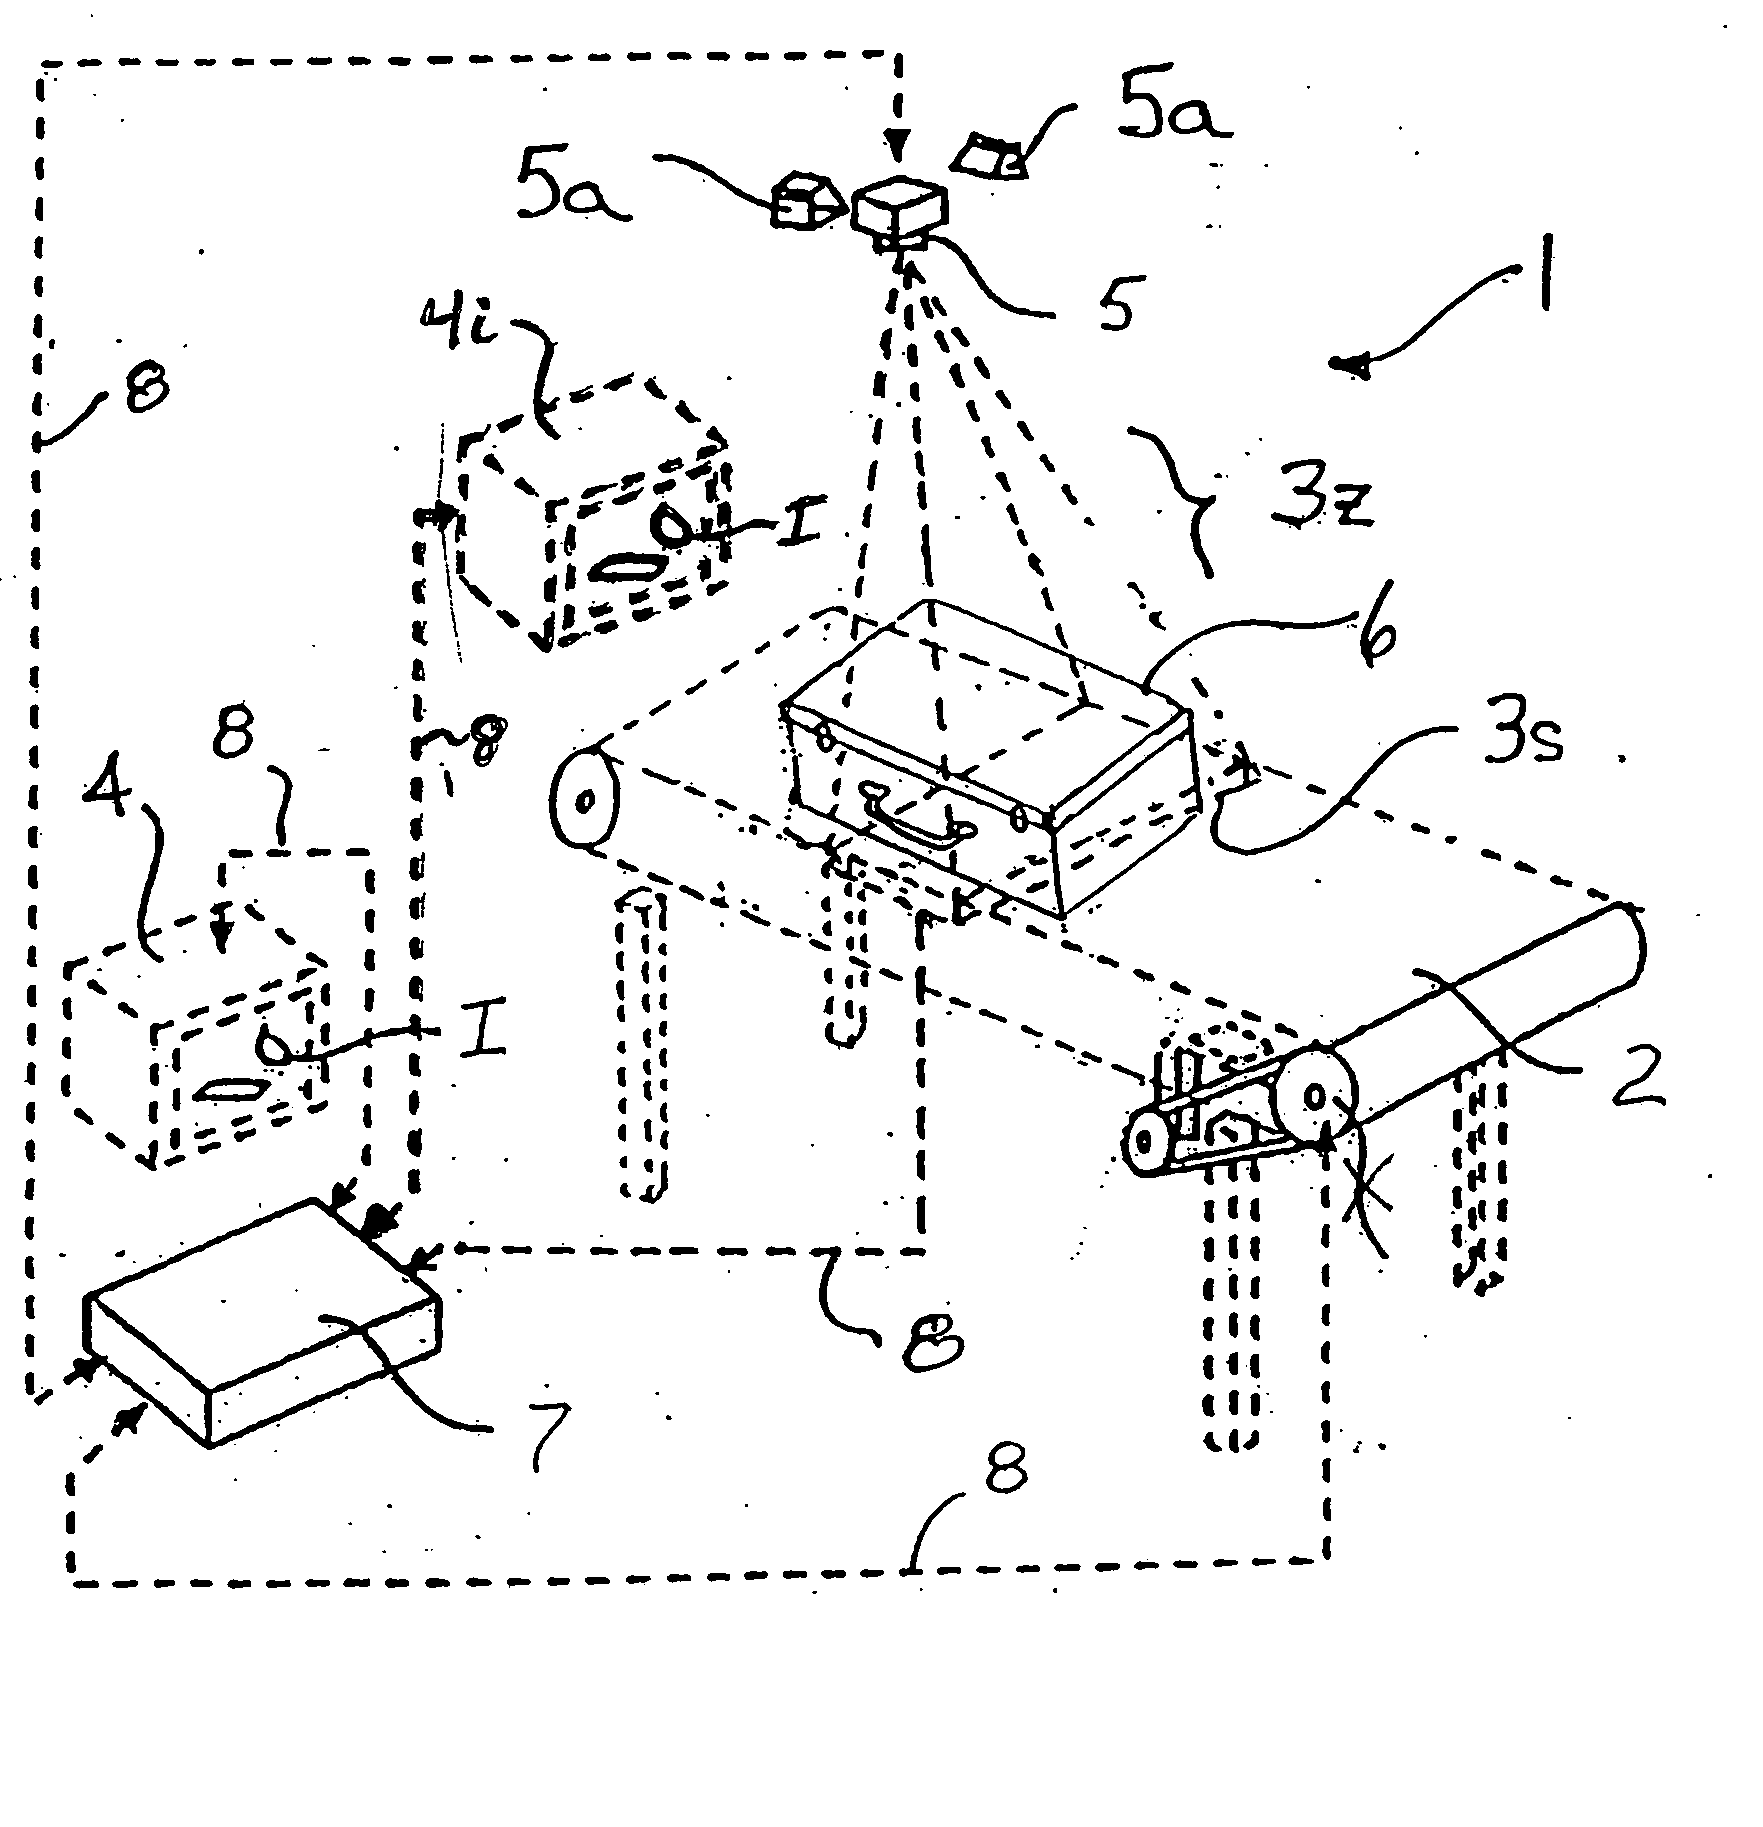 Computer assisted bag screening system